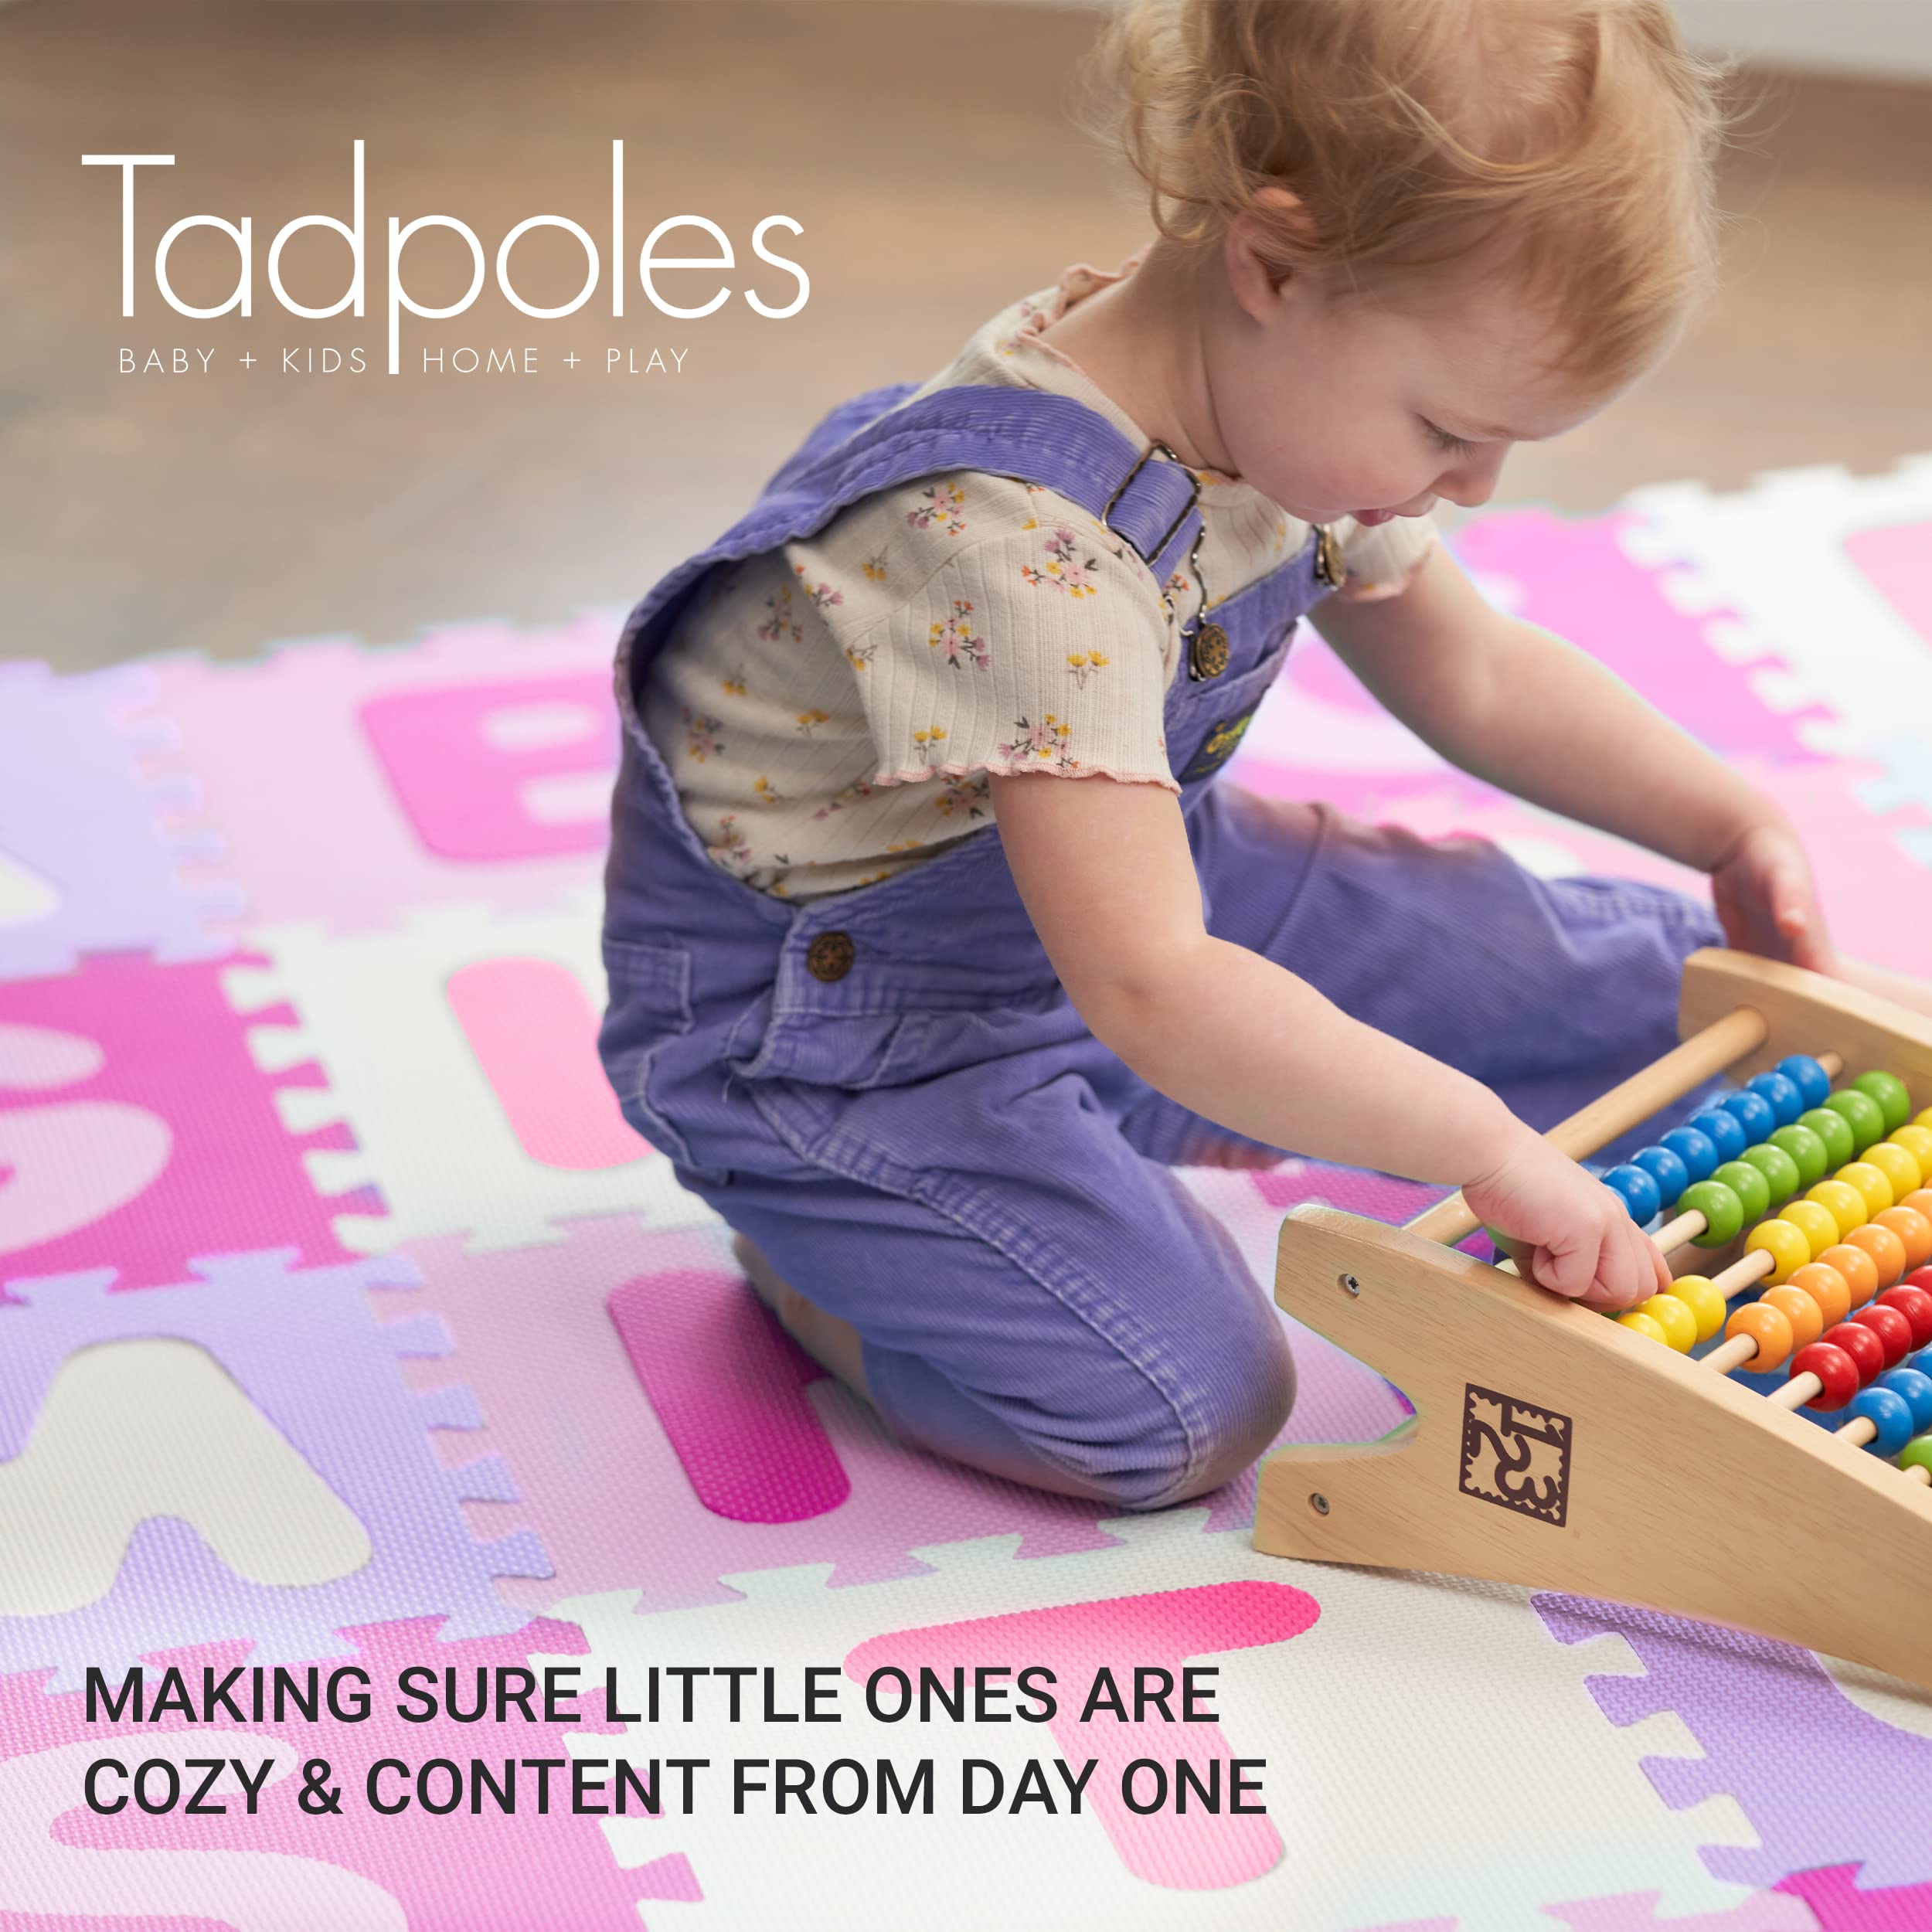 Tadpoles Foam Playmats for Kids, 36 Interlocking Tiles Teach the ABCs and Numbers 0-9, For Ages 3 and Up, Colors: Pink/Purple, 36 Count (Pack of 1)